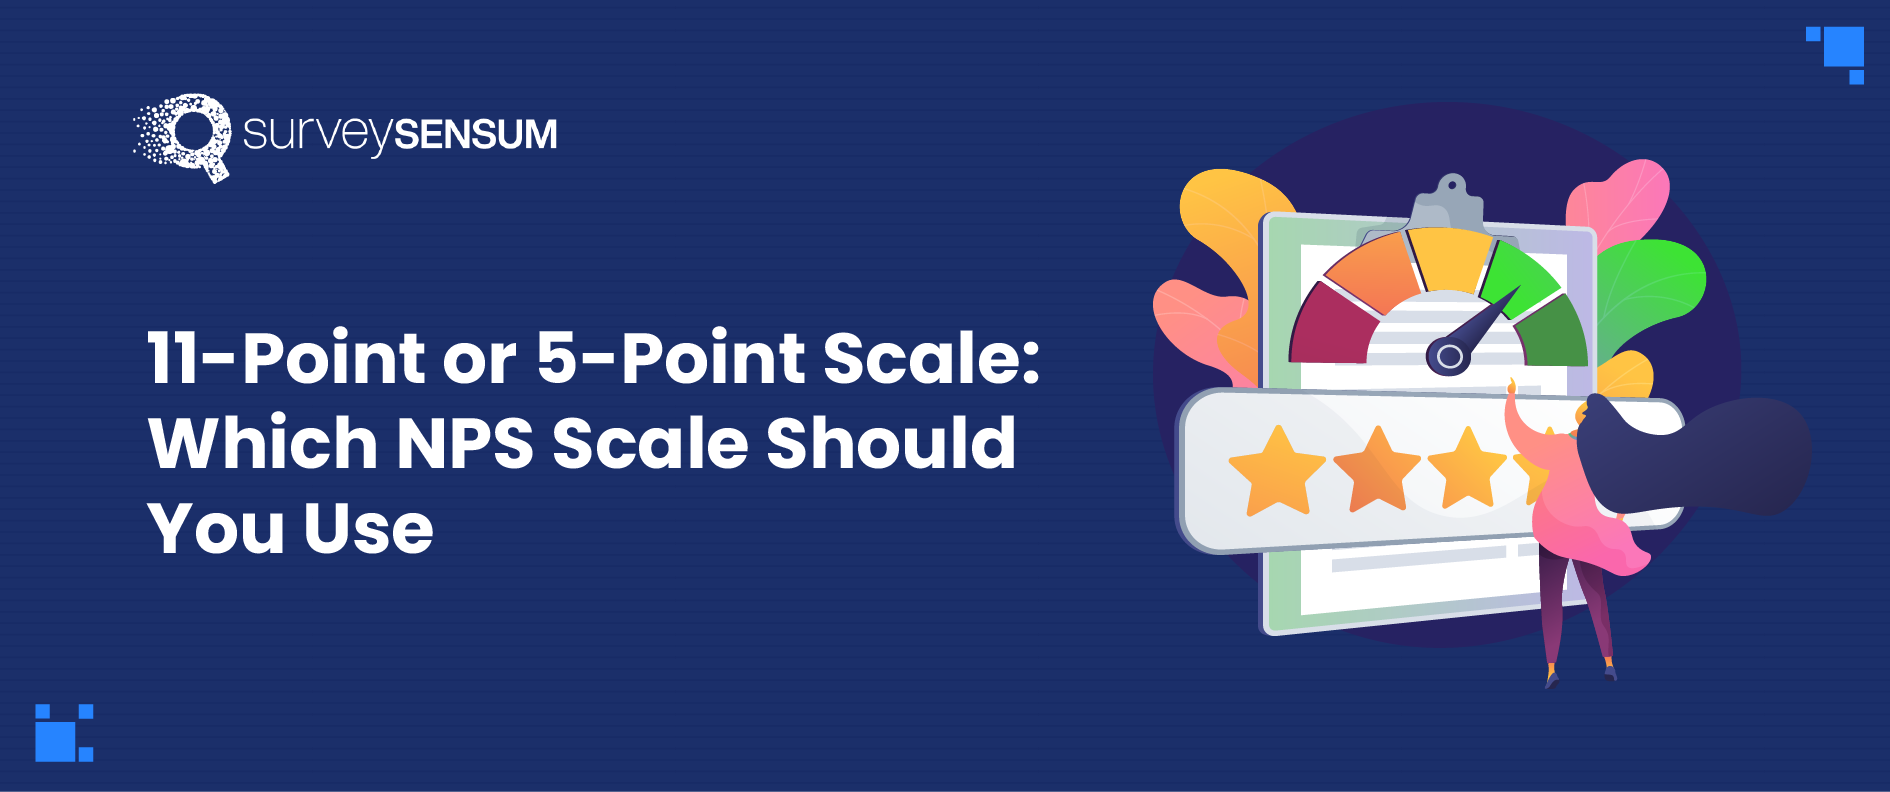 11-Point or 5-Point Scale: Which NPS Scale Should You Use